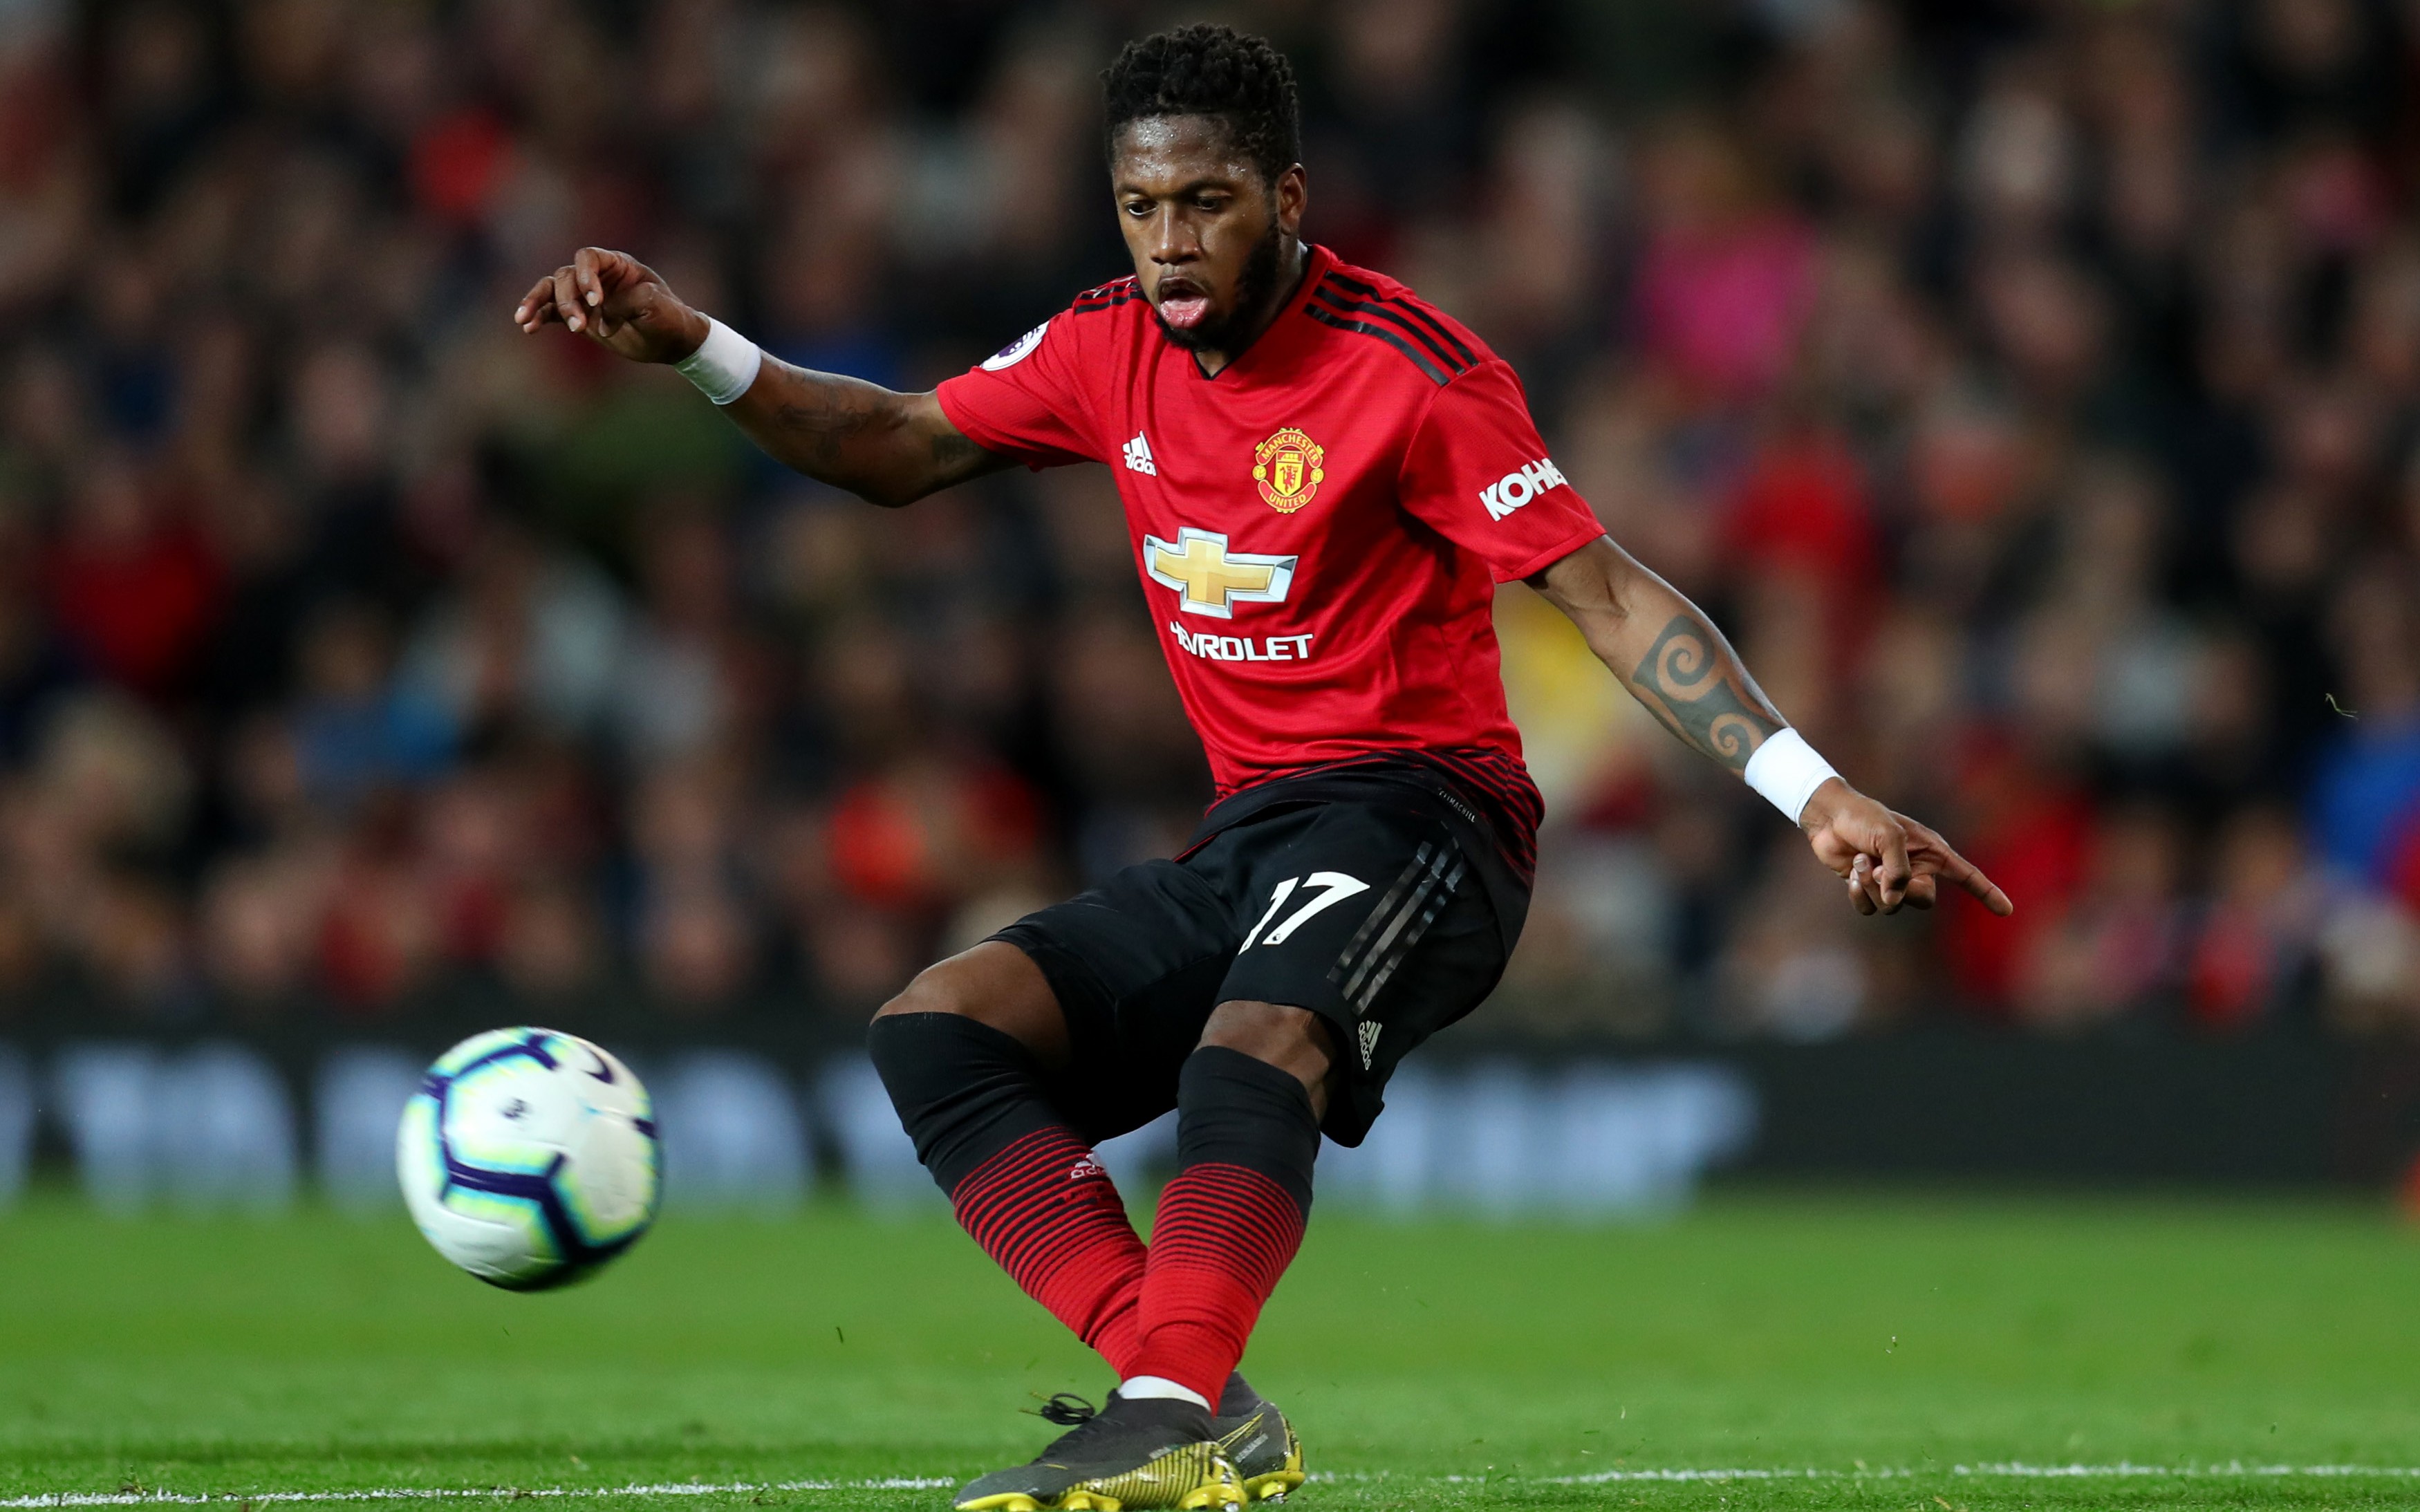 MANCHESTER, ENGLAND - APRIL 24: Fred of Manchester United  during the Premier League match between Manchester United and Manchester City at Old Trafford on April 24, 2019 in Manchester, United Kingdom. (Photo by Catherine Ivill/Getty Images)